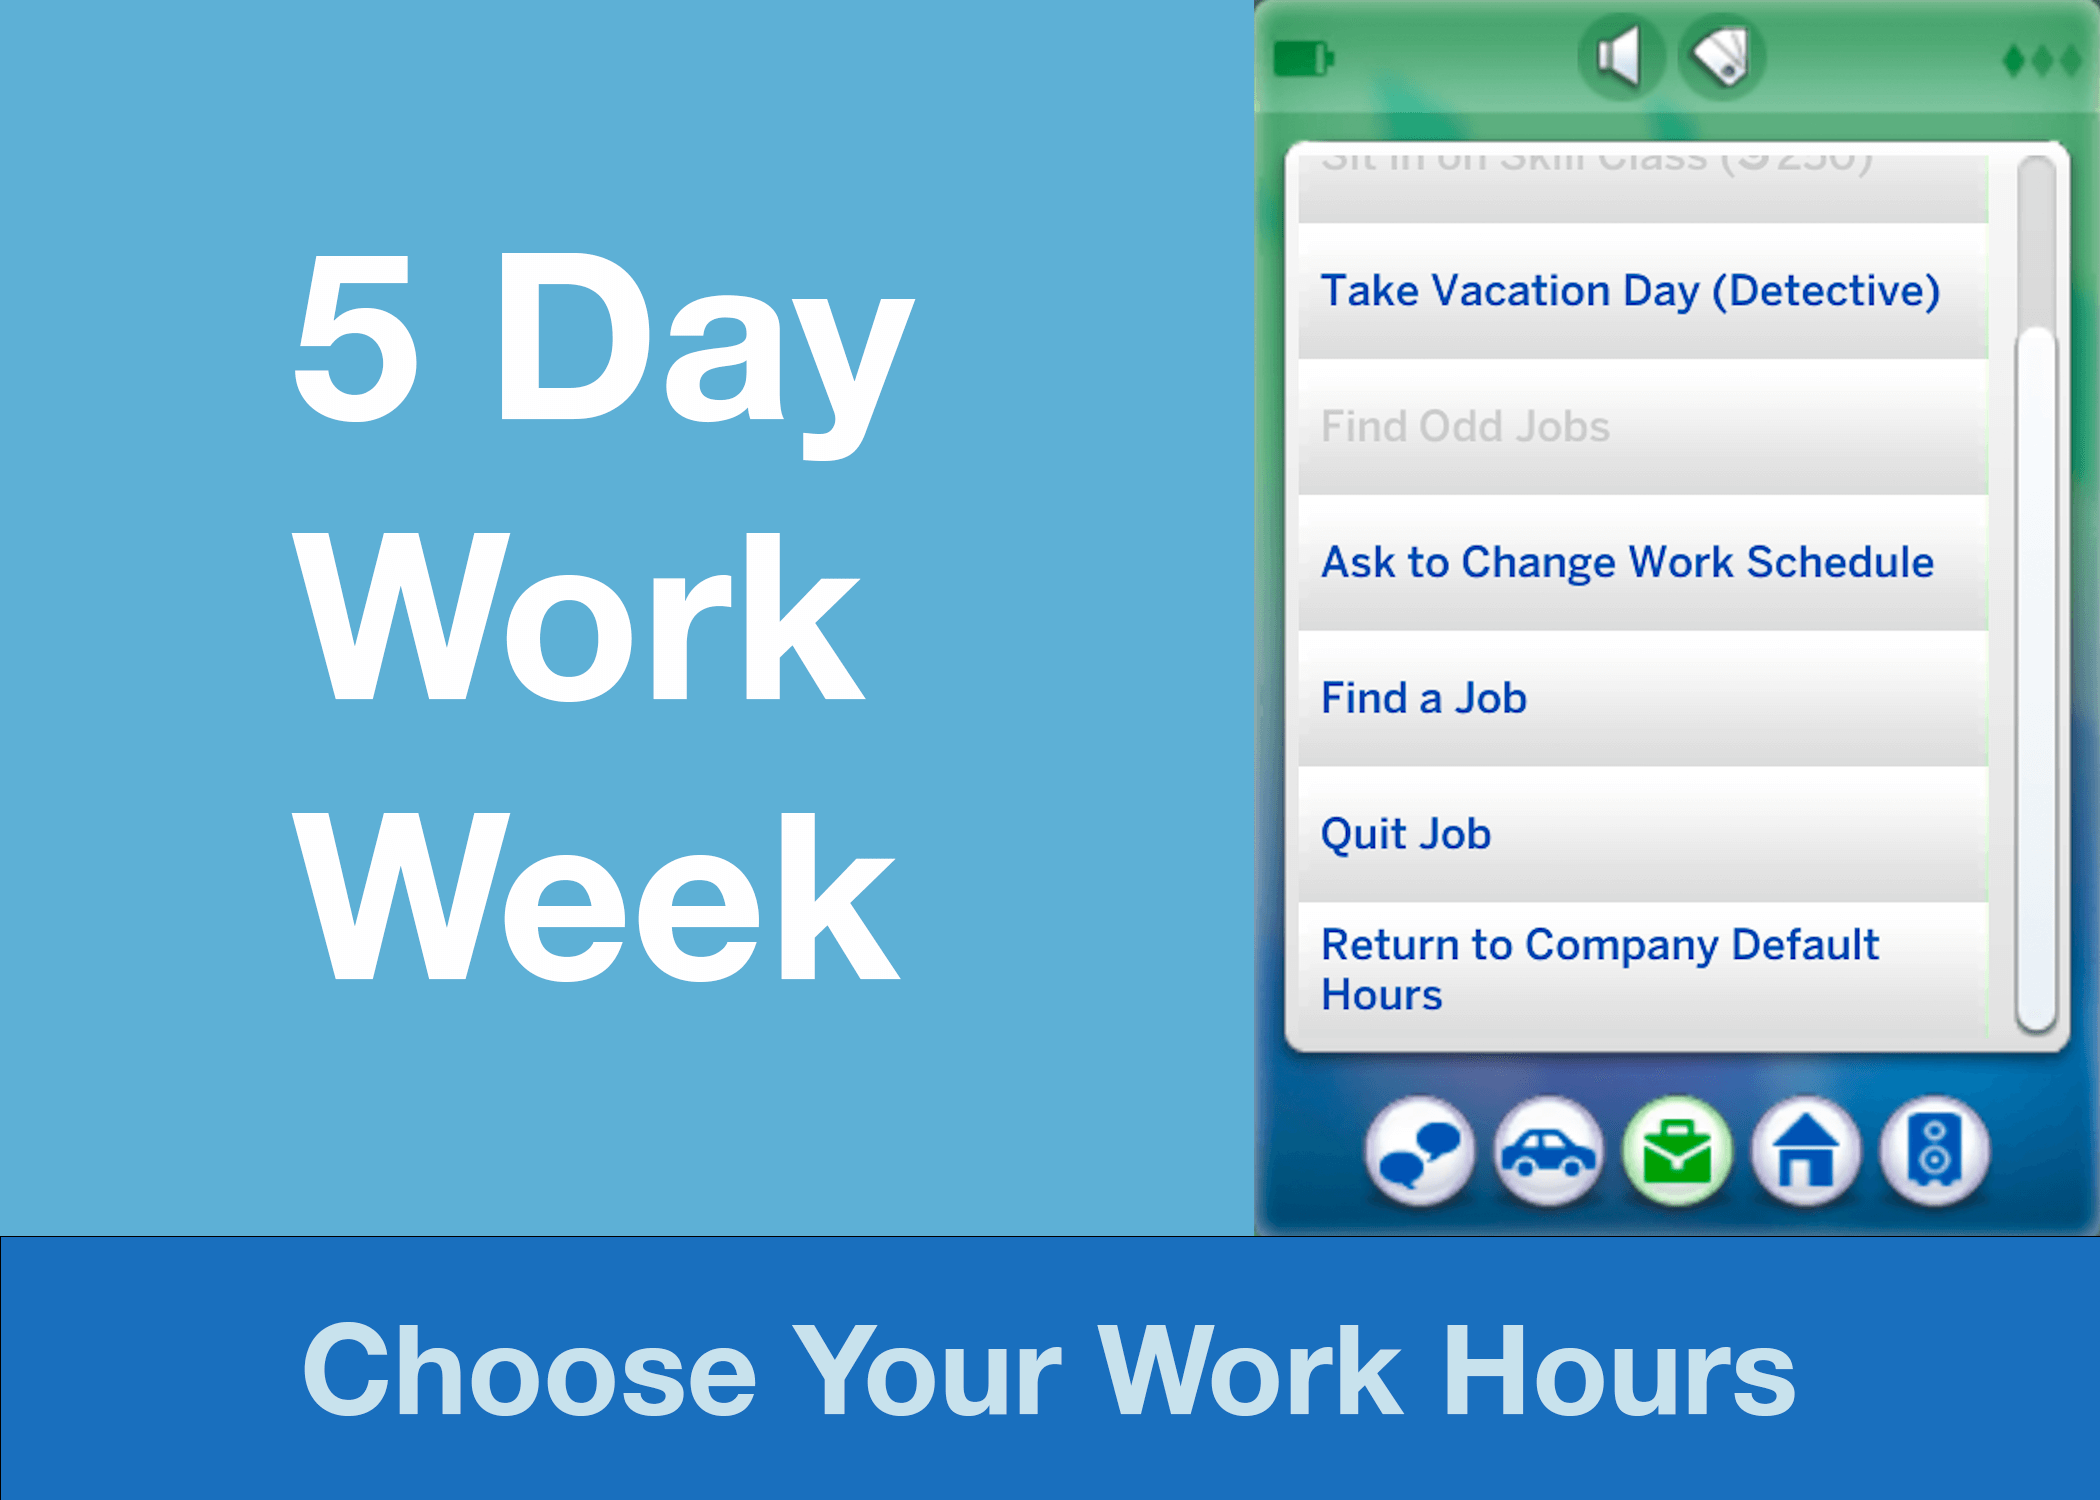 5-day-work-week-choose-your-own-work-hours-v2-12-the-sims-4-mods